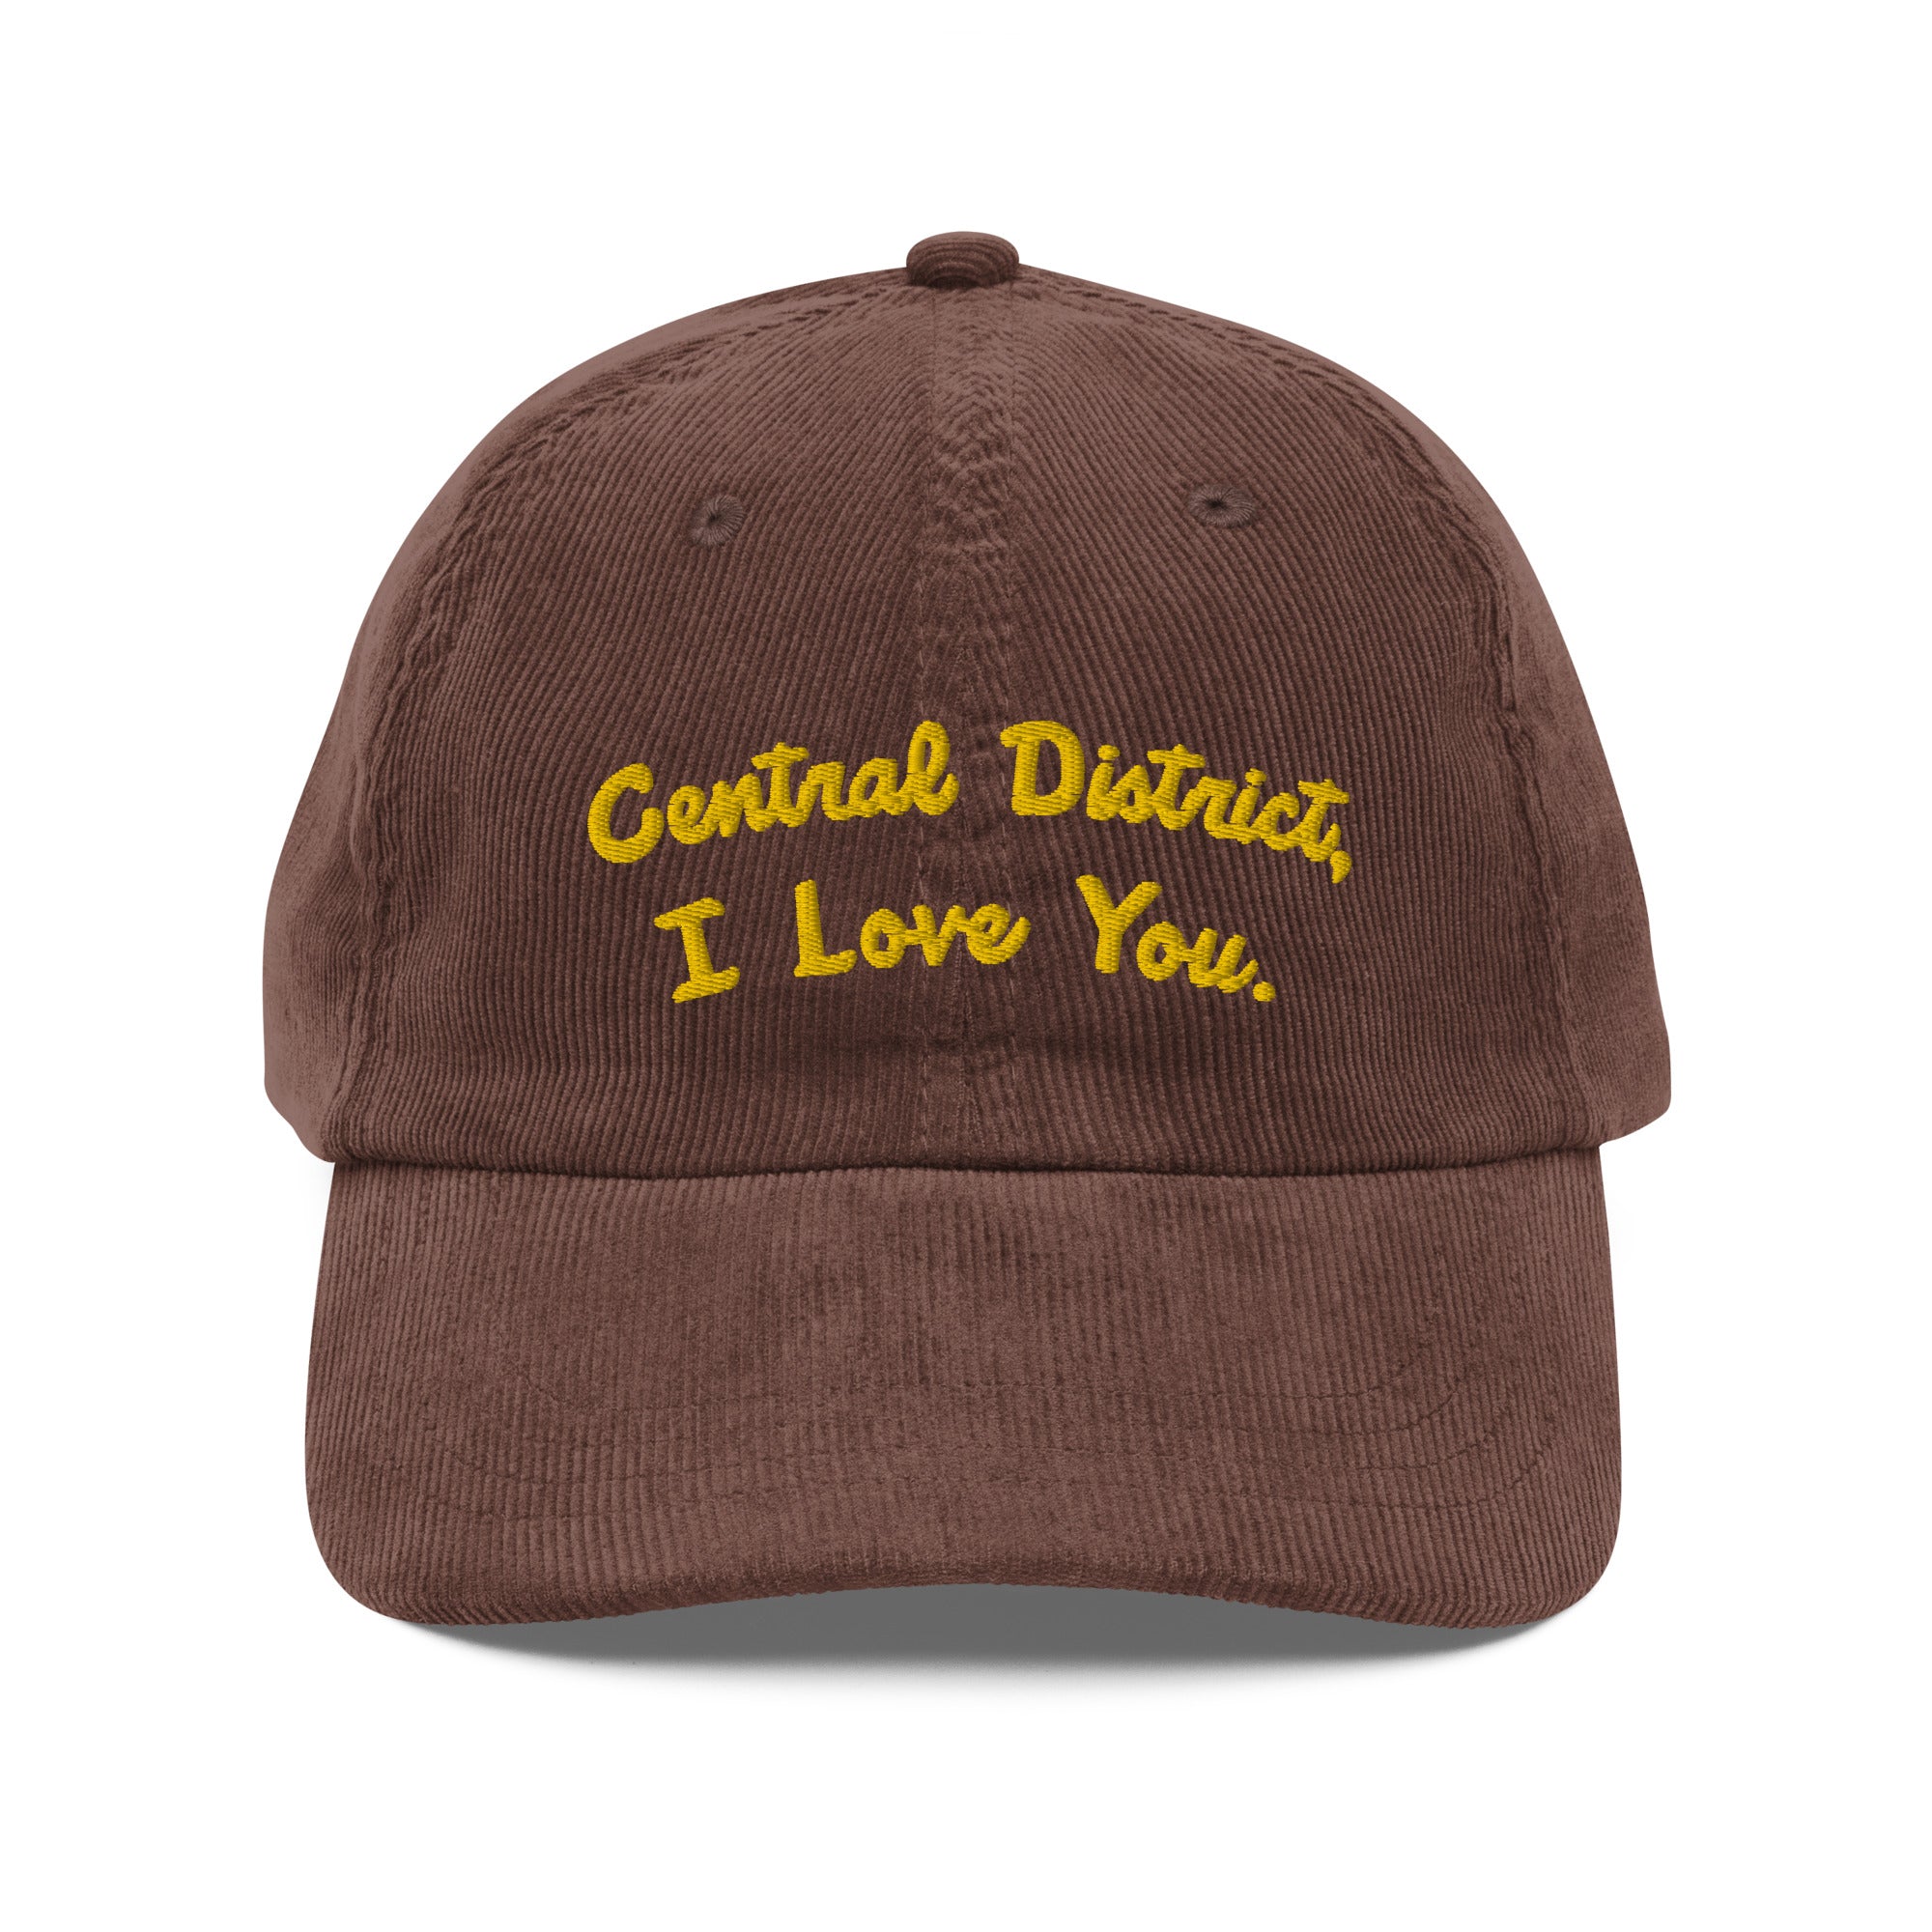 I Love You Corduroy Hat - Central District | Seattle, WA